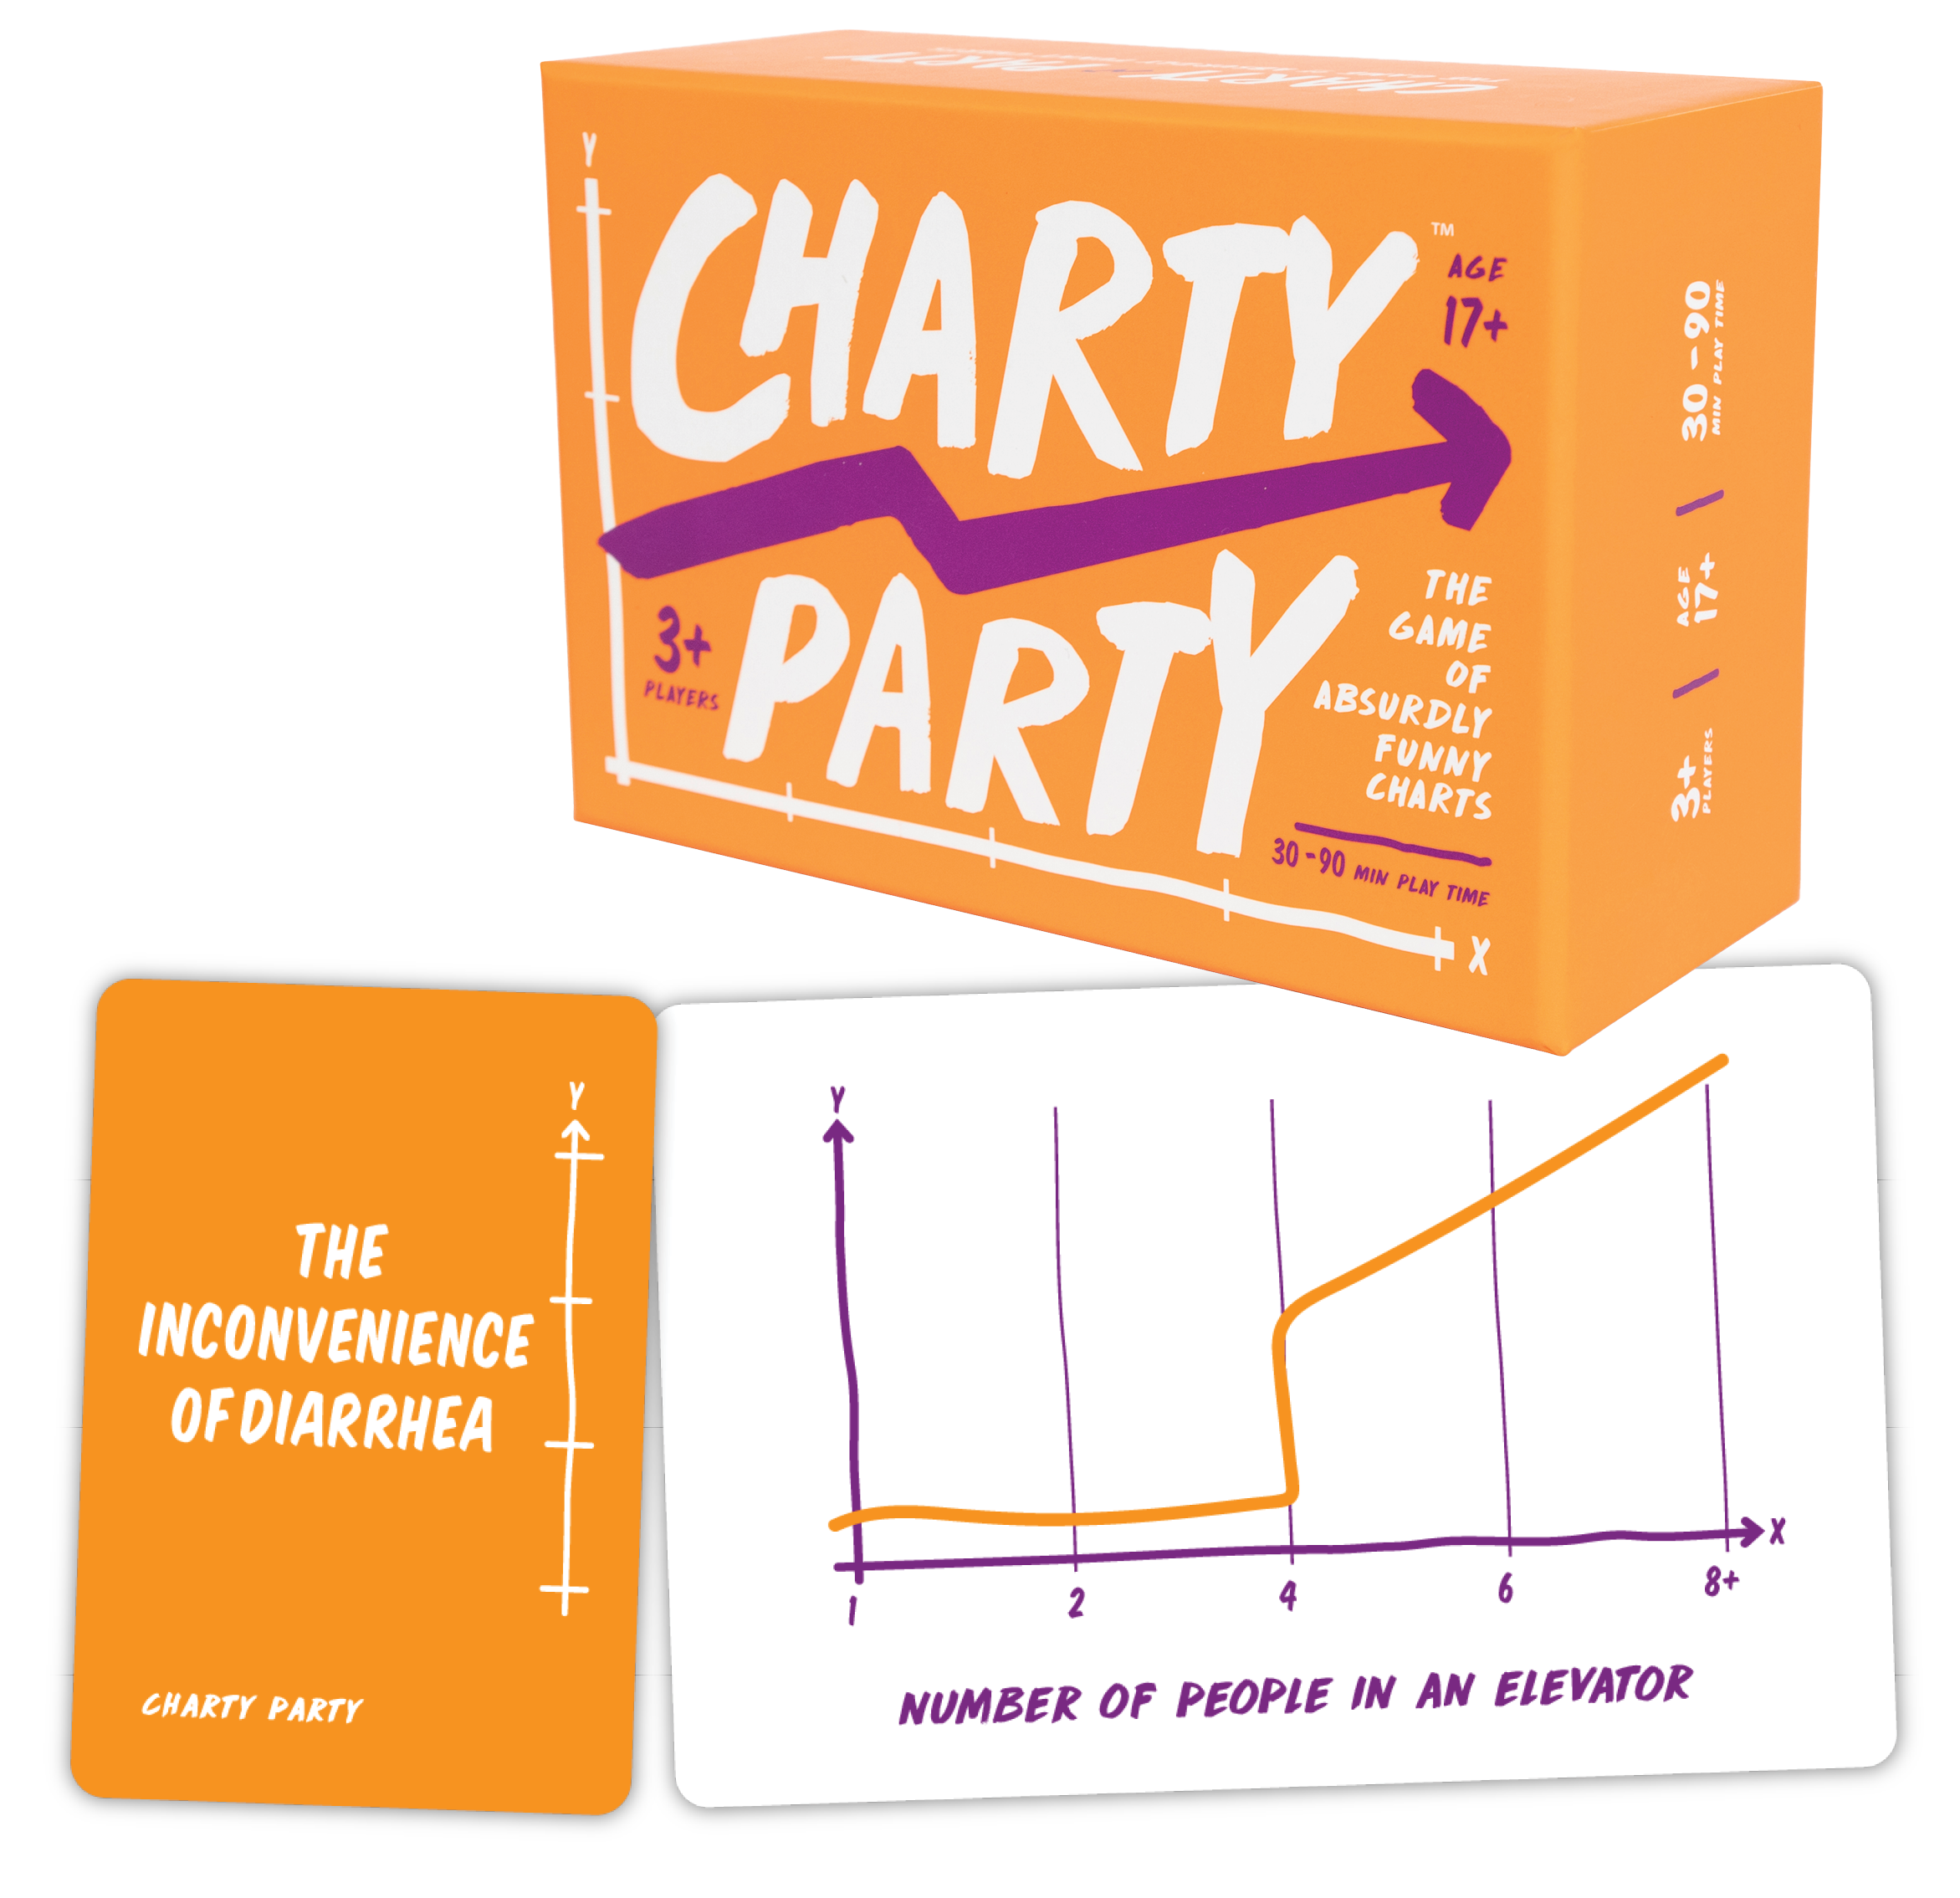 Charty Party: Game of Absurdly Funny Charts - Bards & Cards